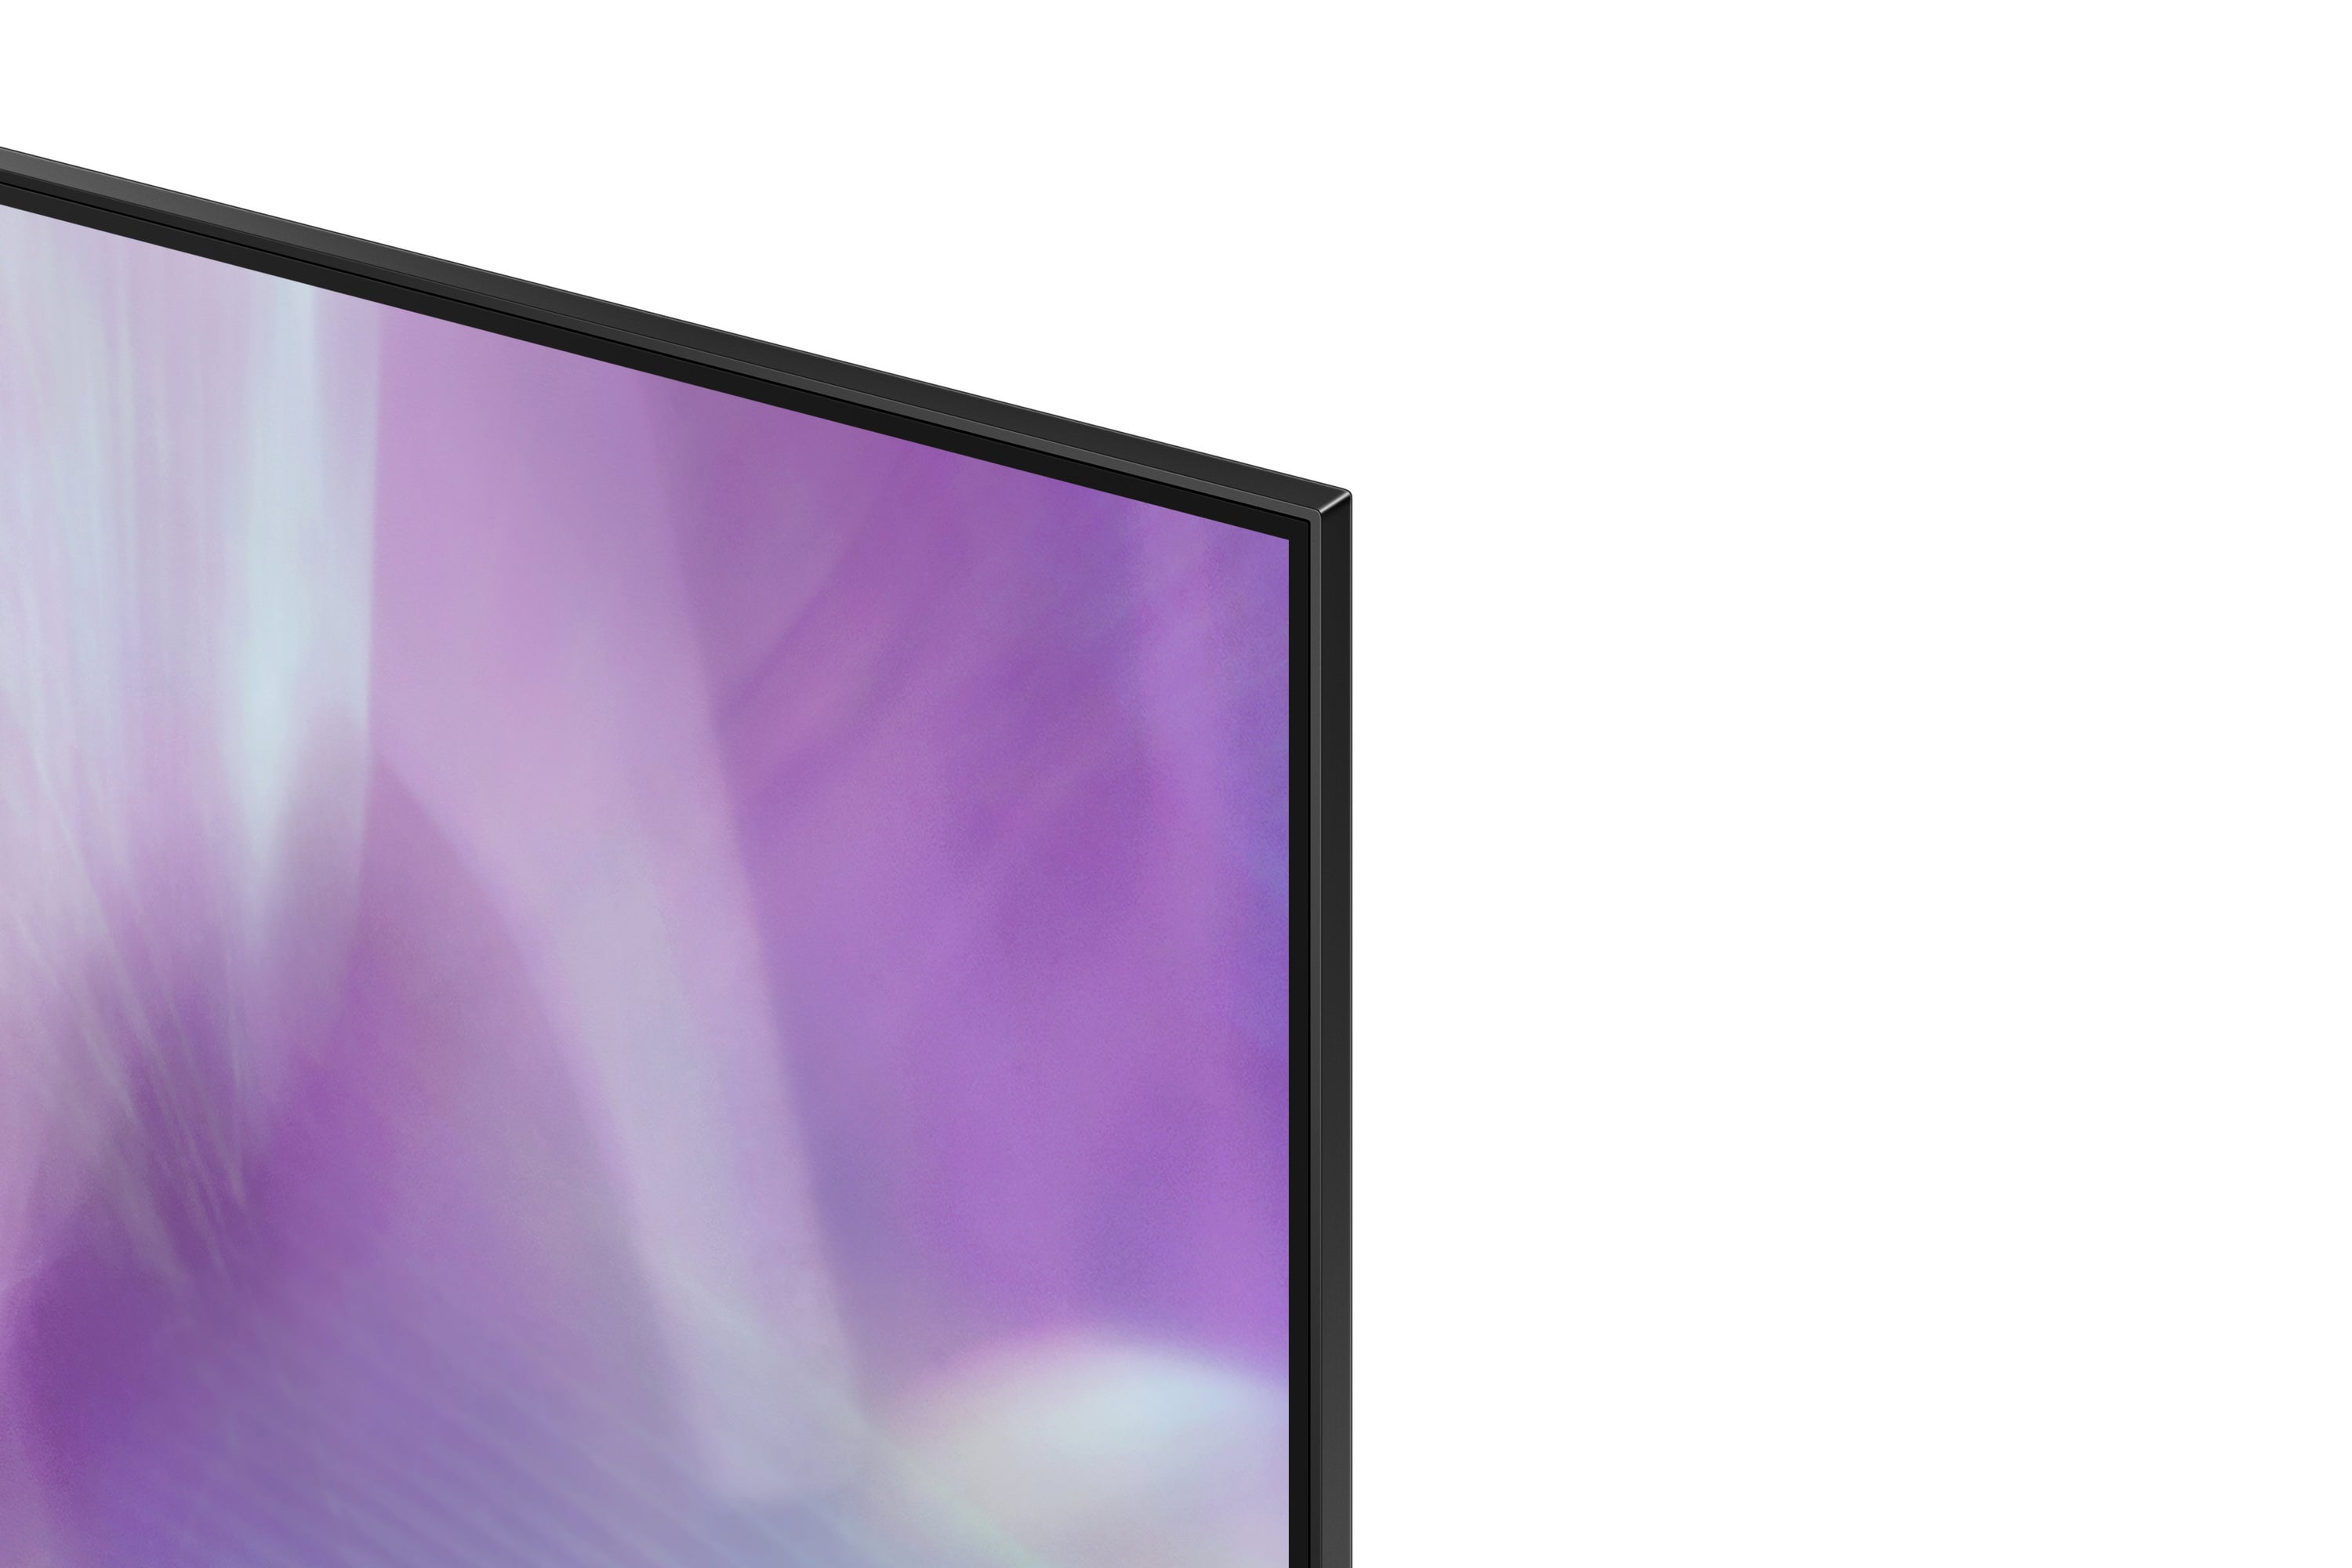 70-Inch Class 4K QLED TV (2021) With Quantum Dot Technology